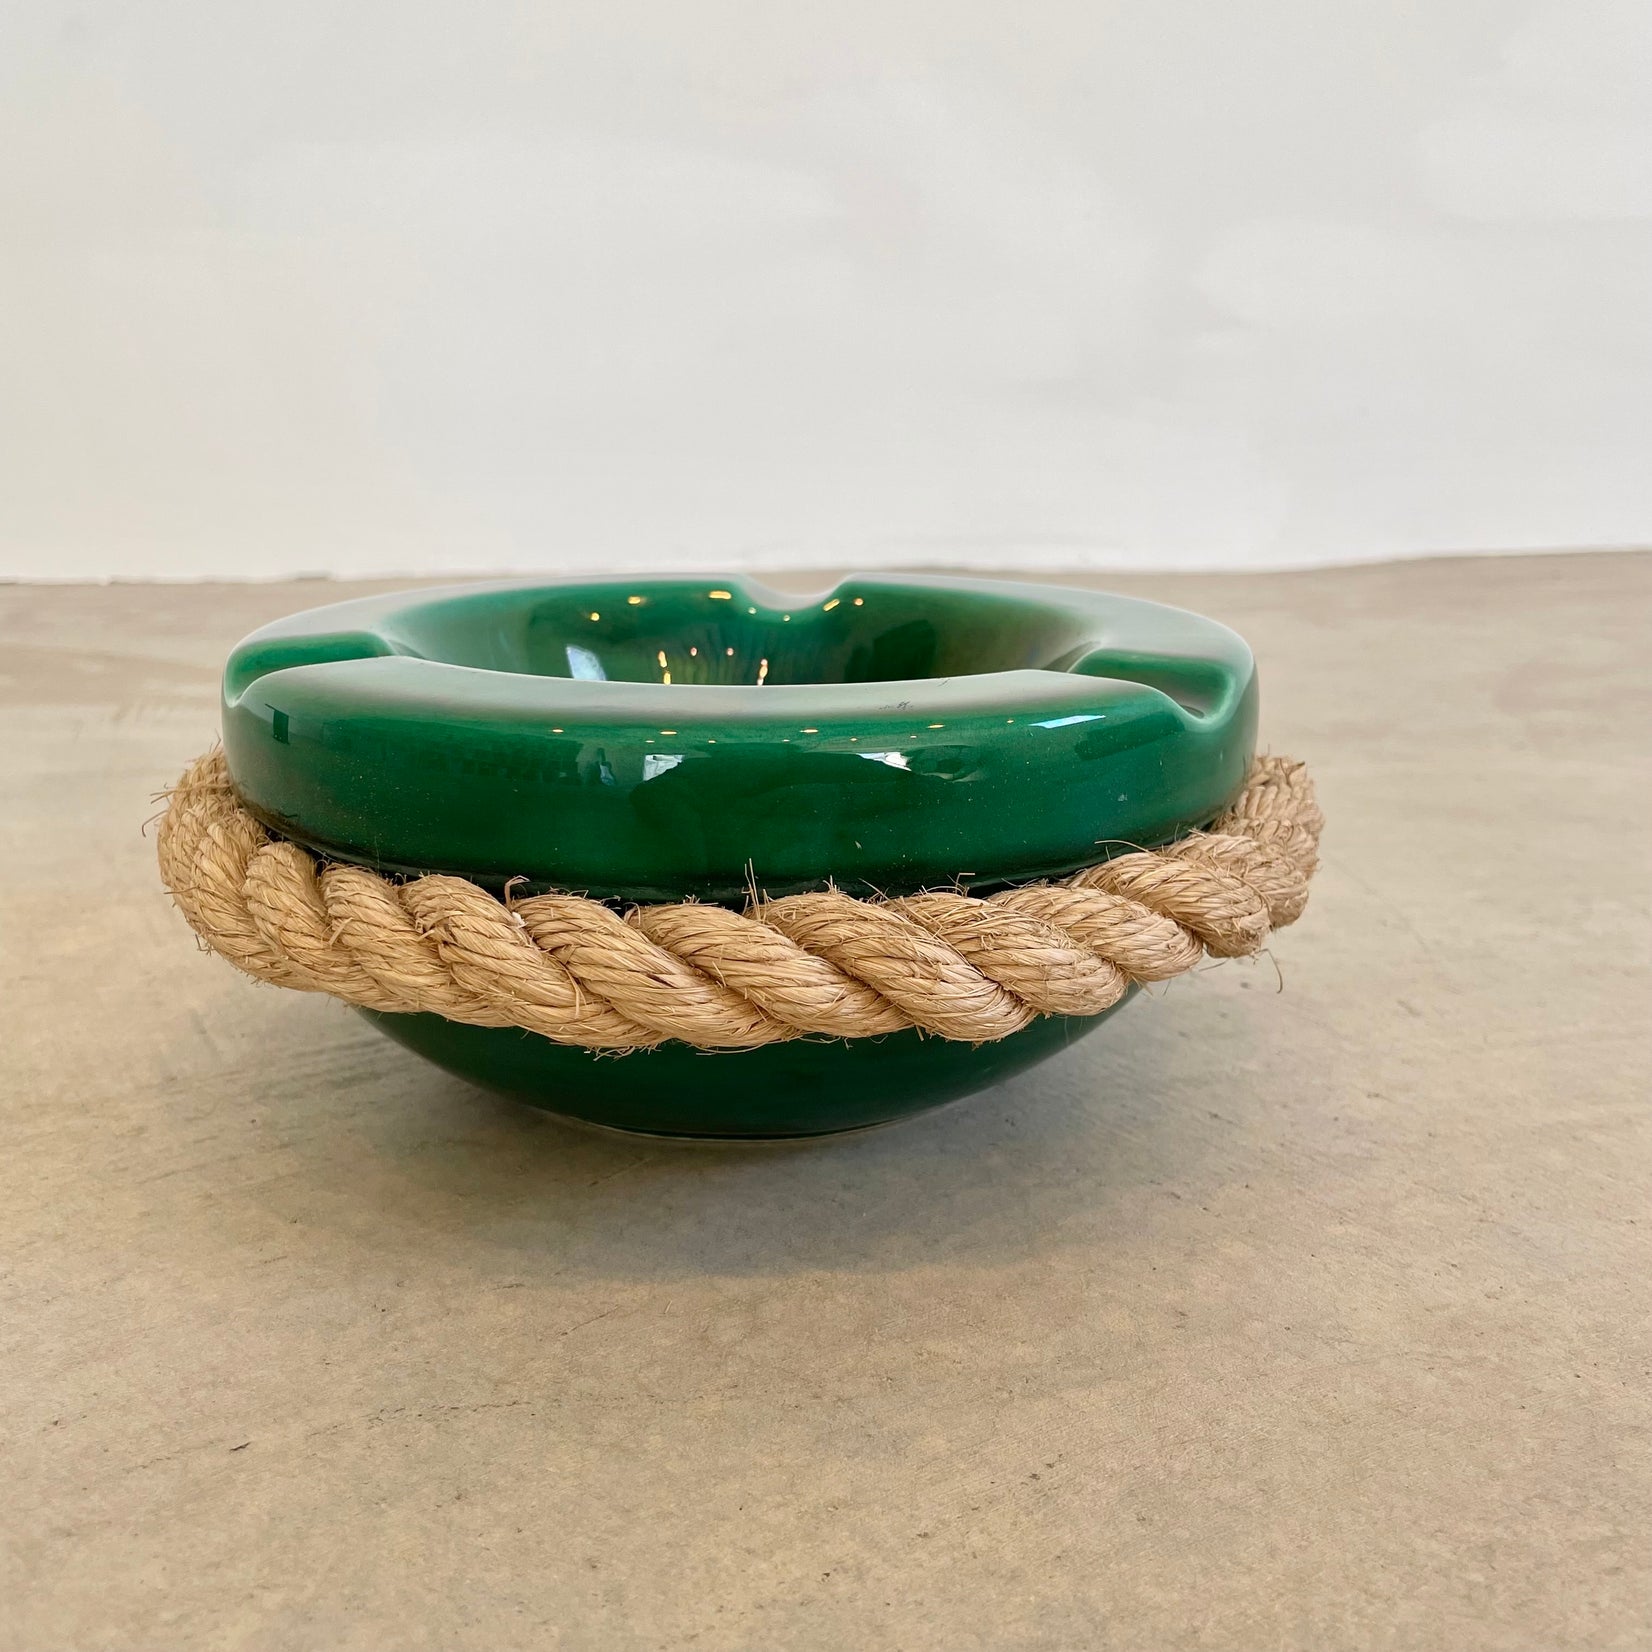 Audoux Minet Style Green Ceramic Ashtray with Rope, 1970s France